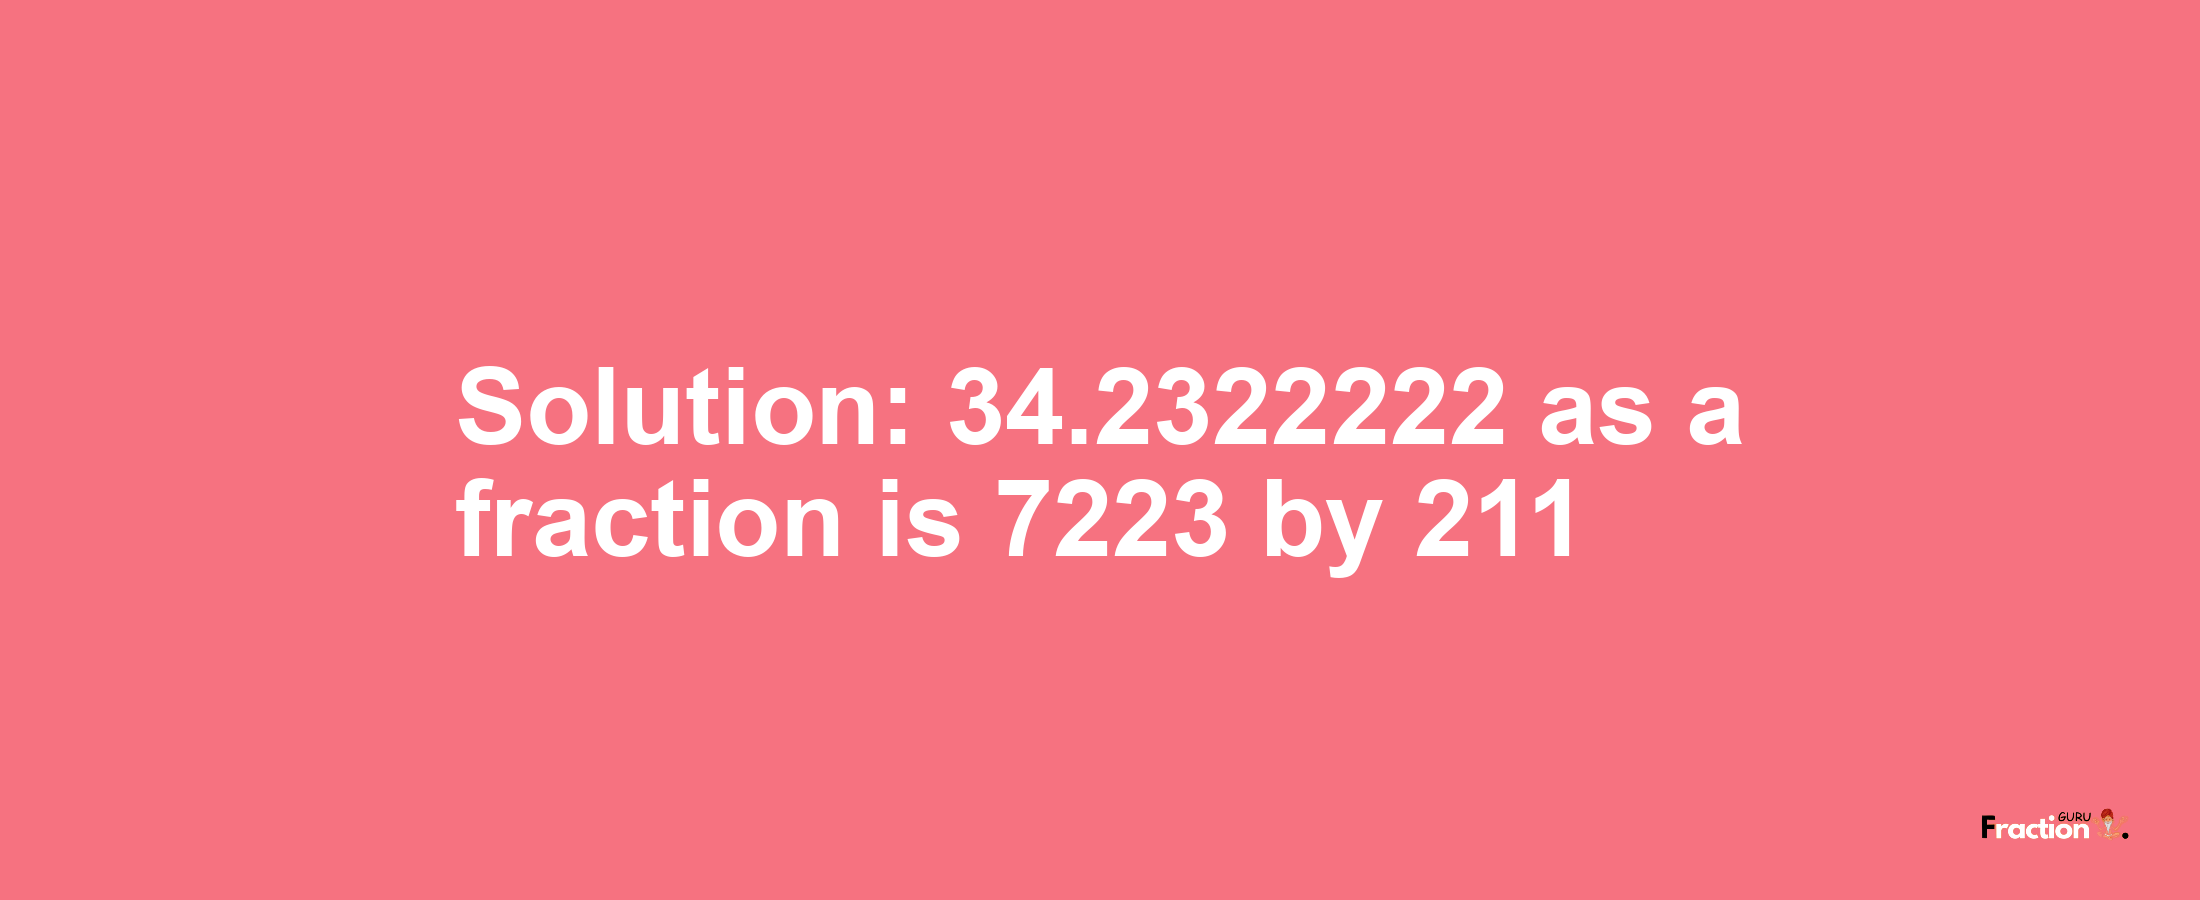 Solution:34.2322222 as a fraction is 7223/211